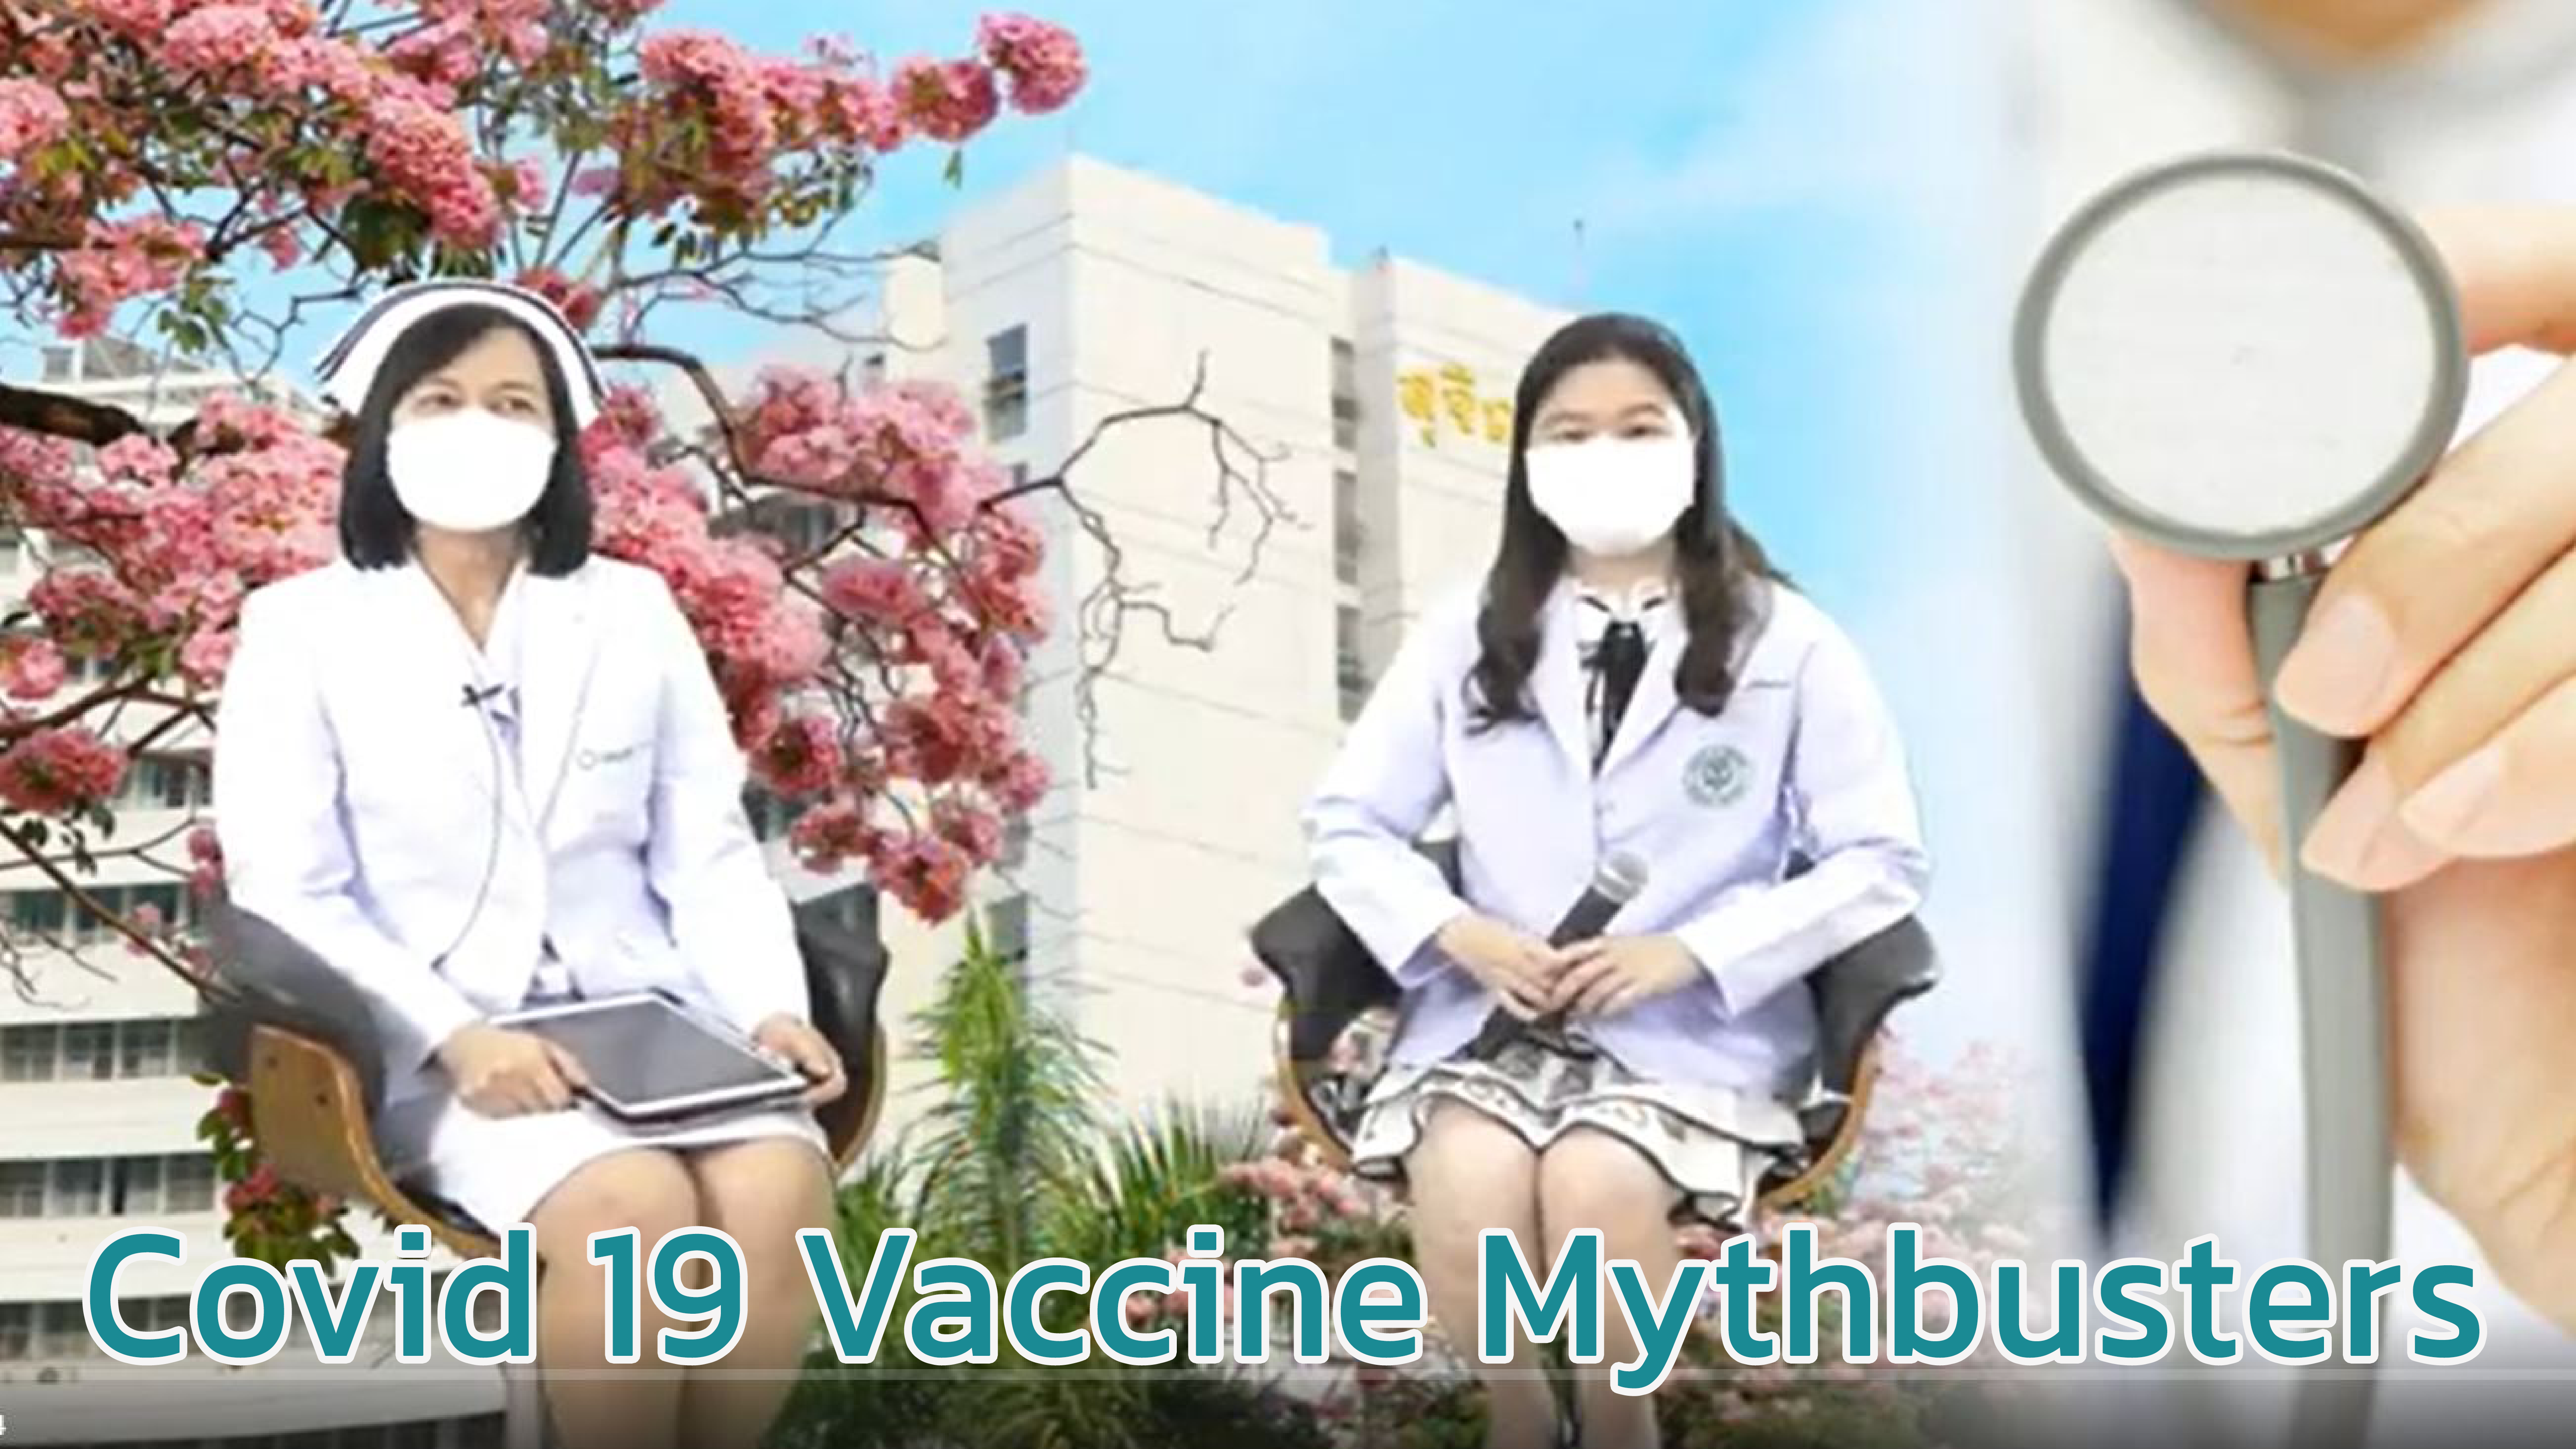 Covid 19 Vaccine Mythbusters (MP4)